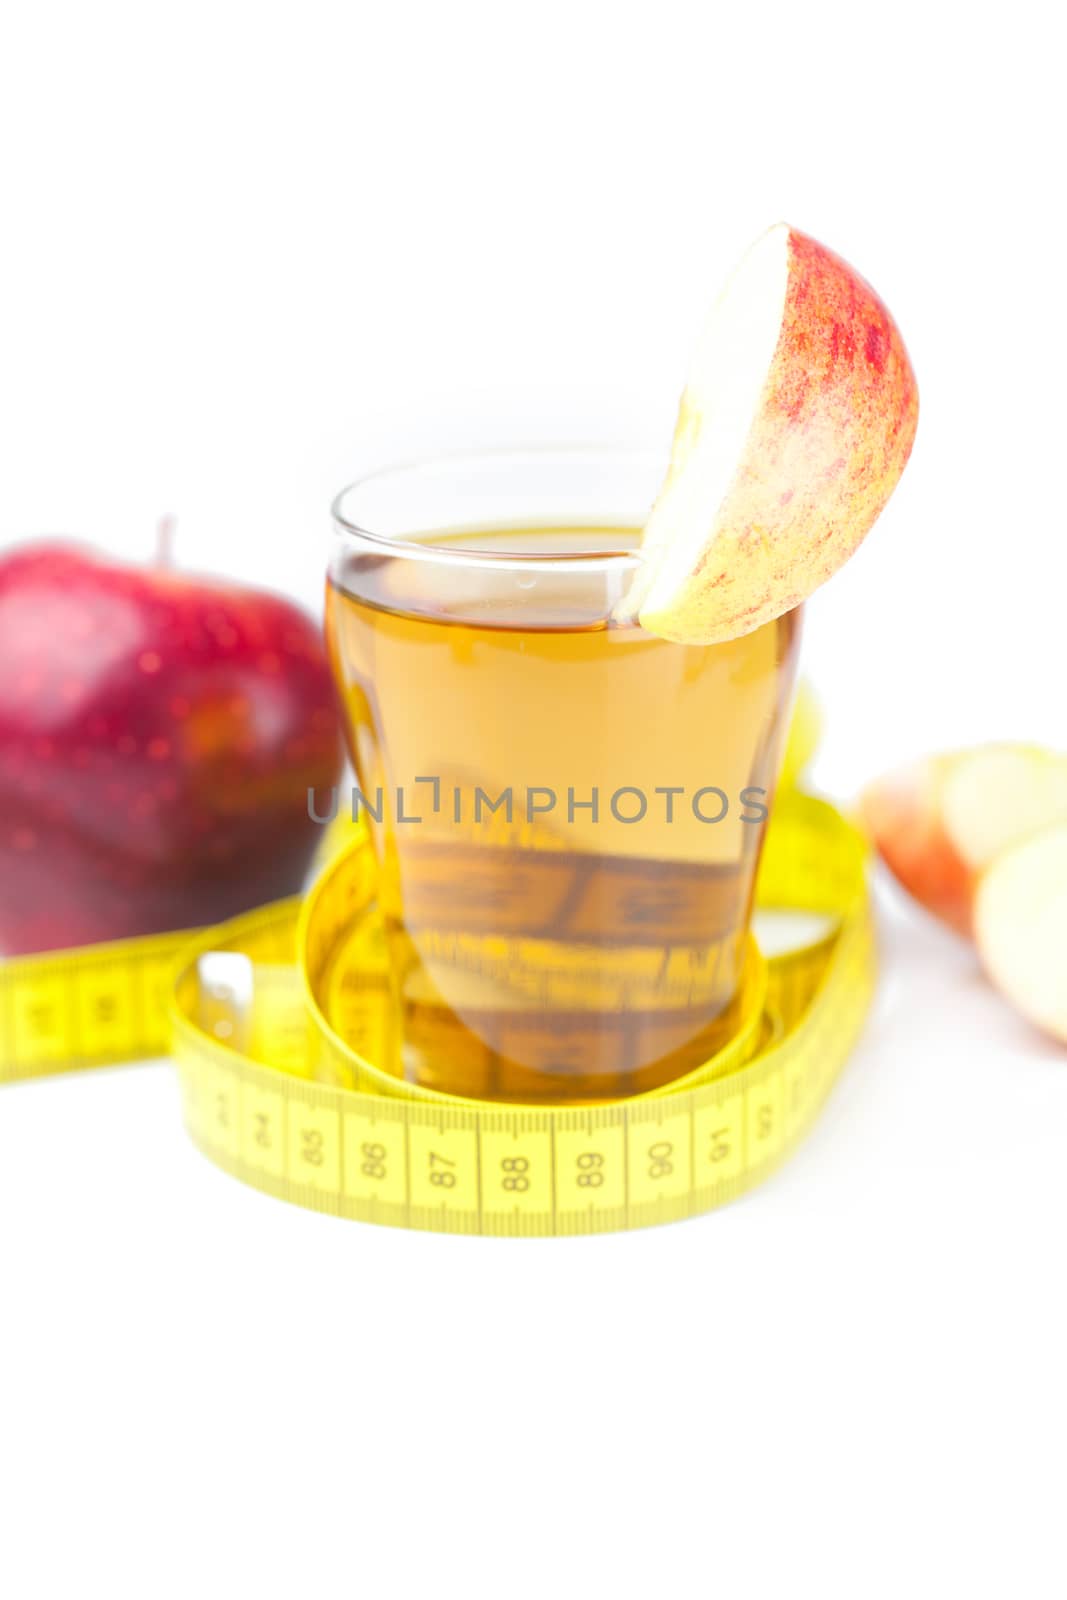 measuring tape,apples and glass of apple juice isolated on white by jannyjus